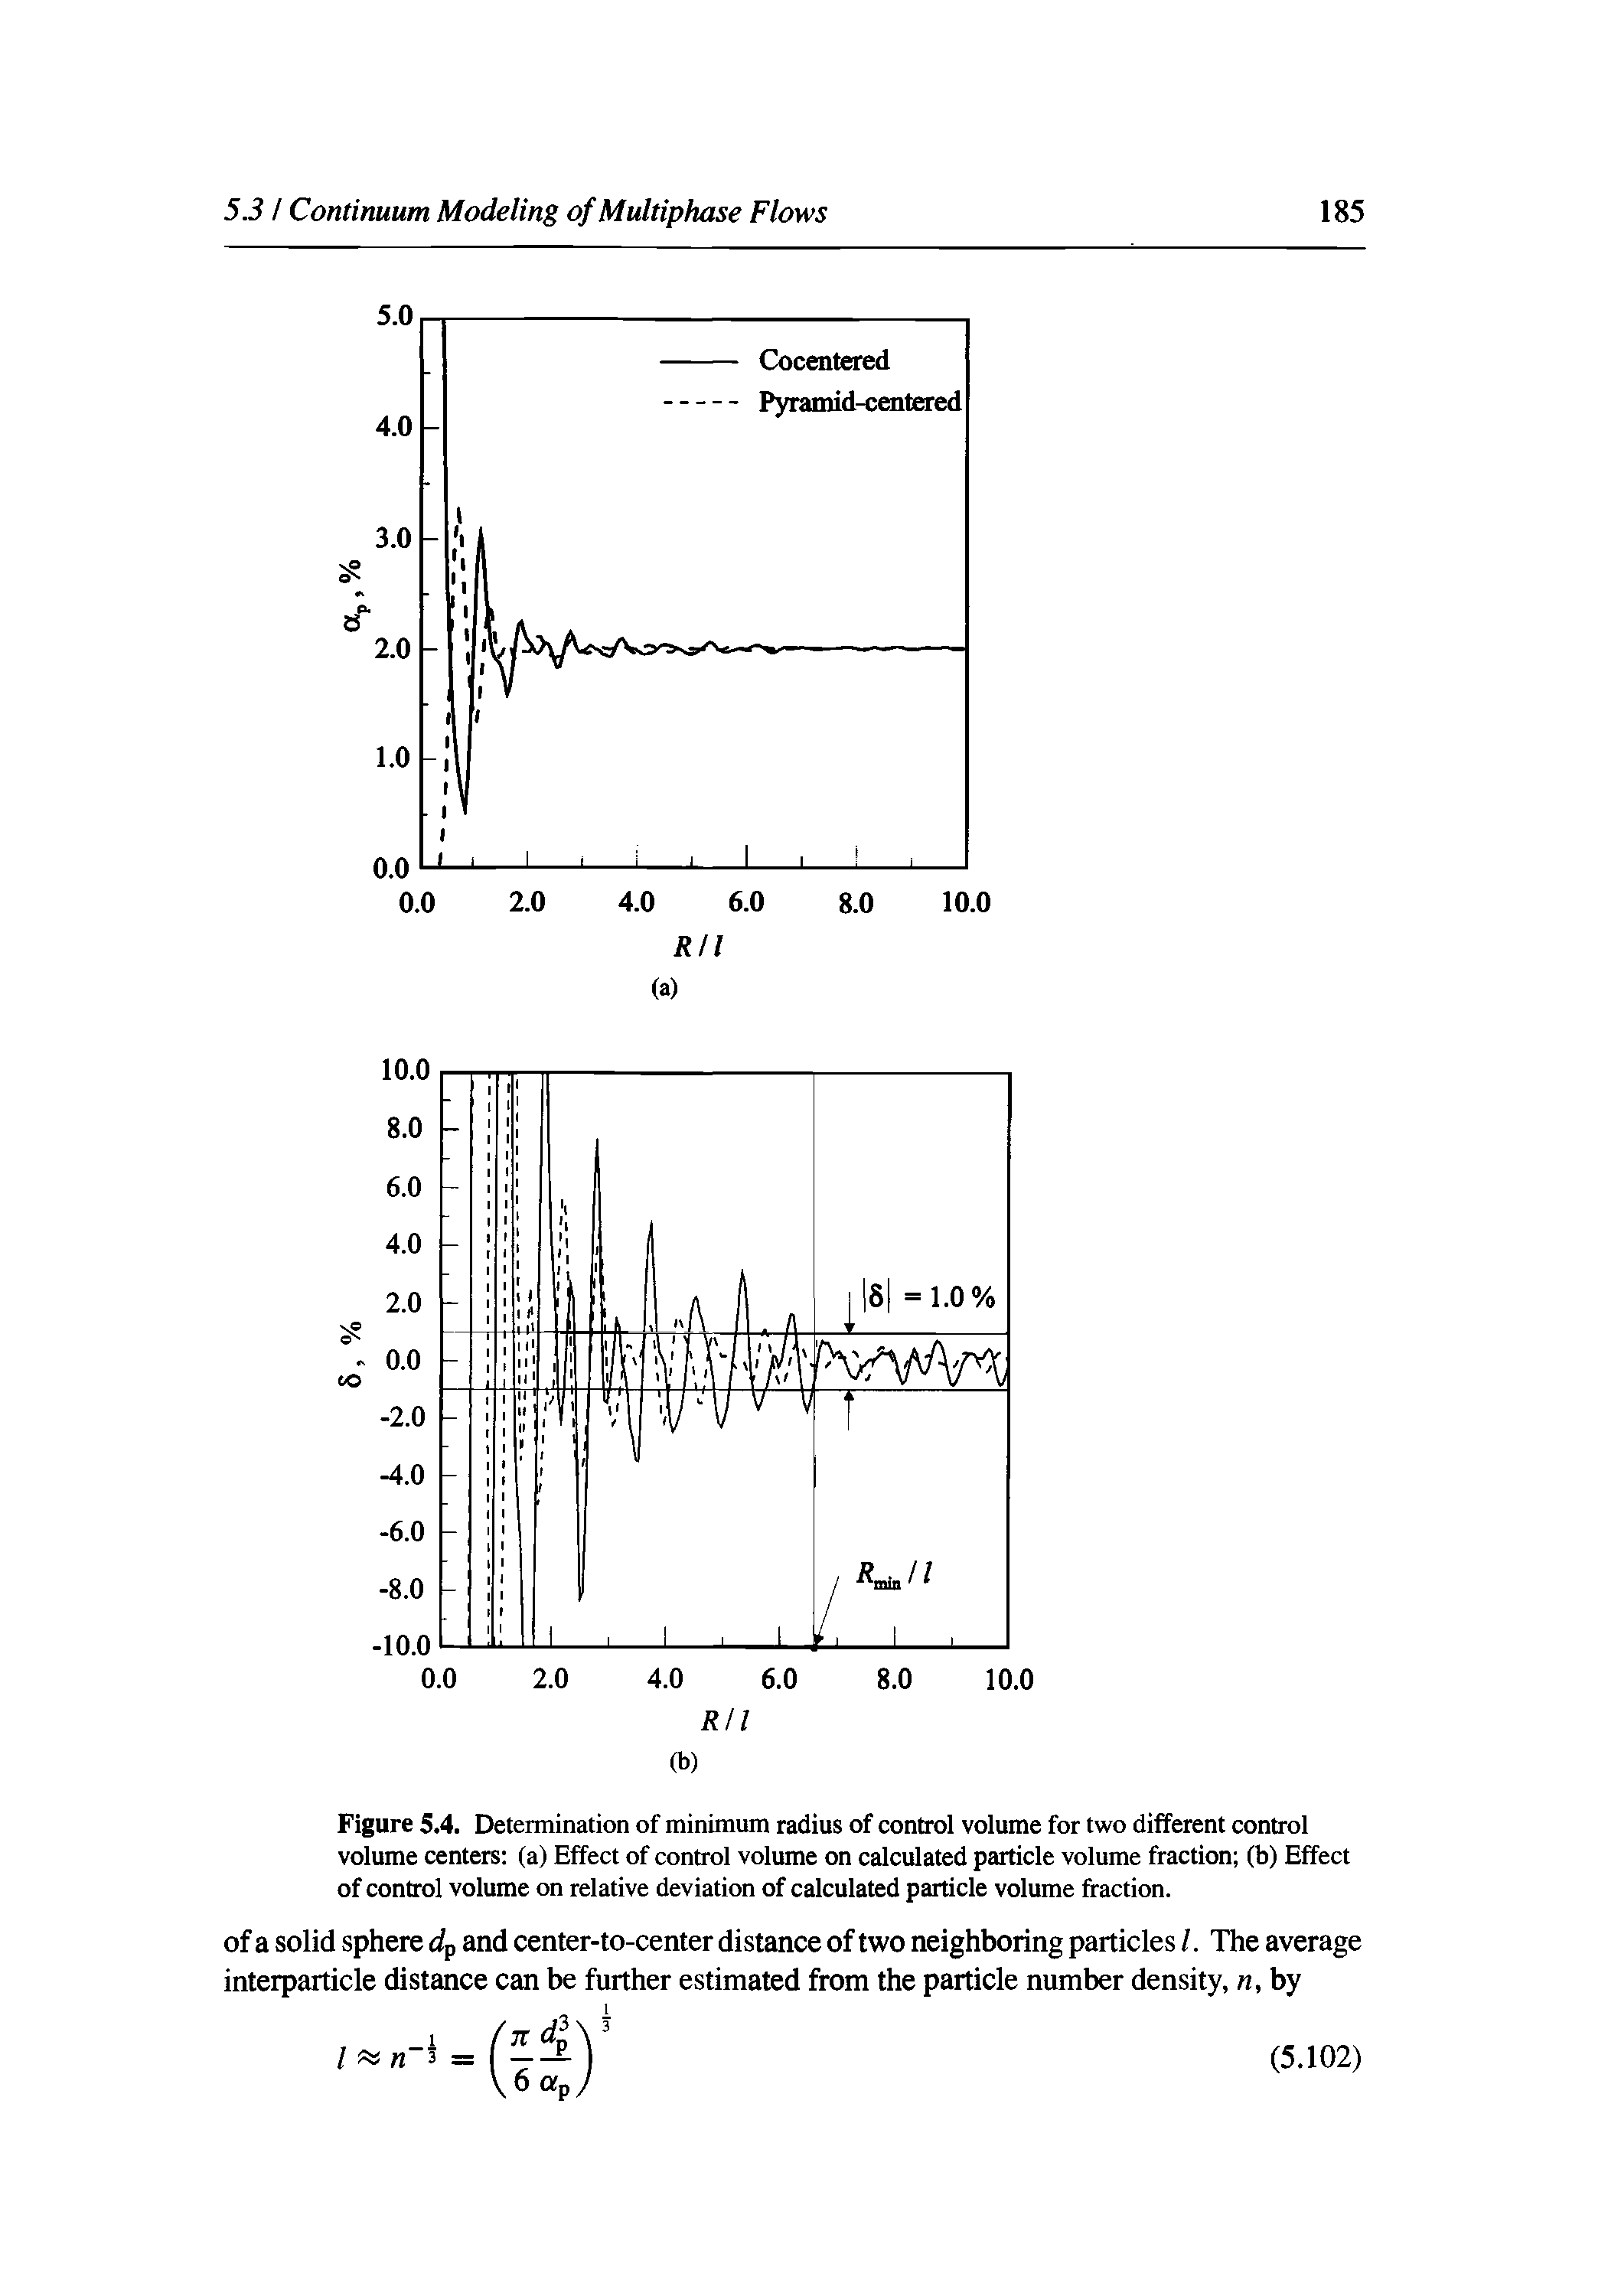 Figure 5.4. Determination of minimum radius of control volume for two different control volume centers (a) Effect of control volume on calculated particle volume fraction (b) Effect of control volume on relative deviation of calculated particle volume fraction.